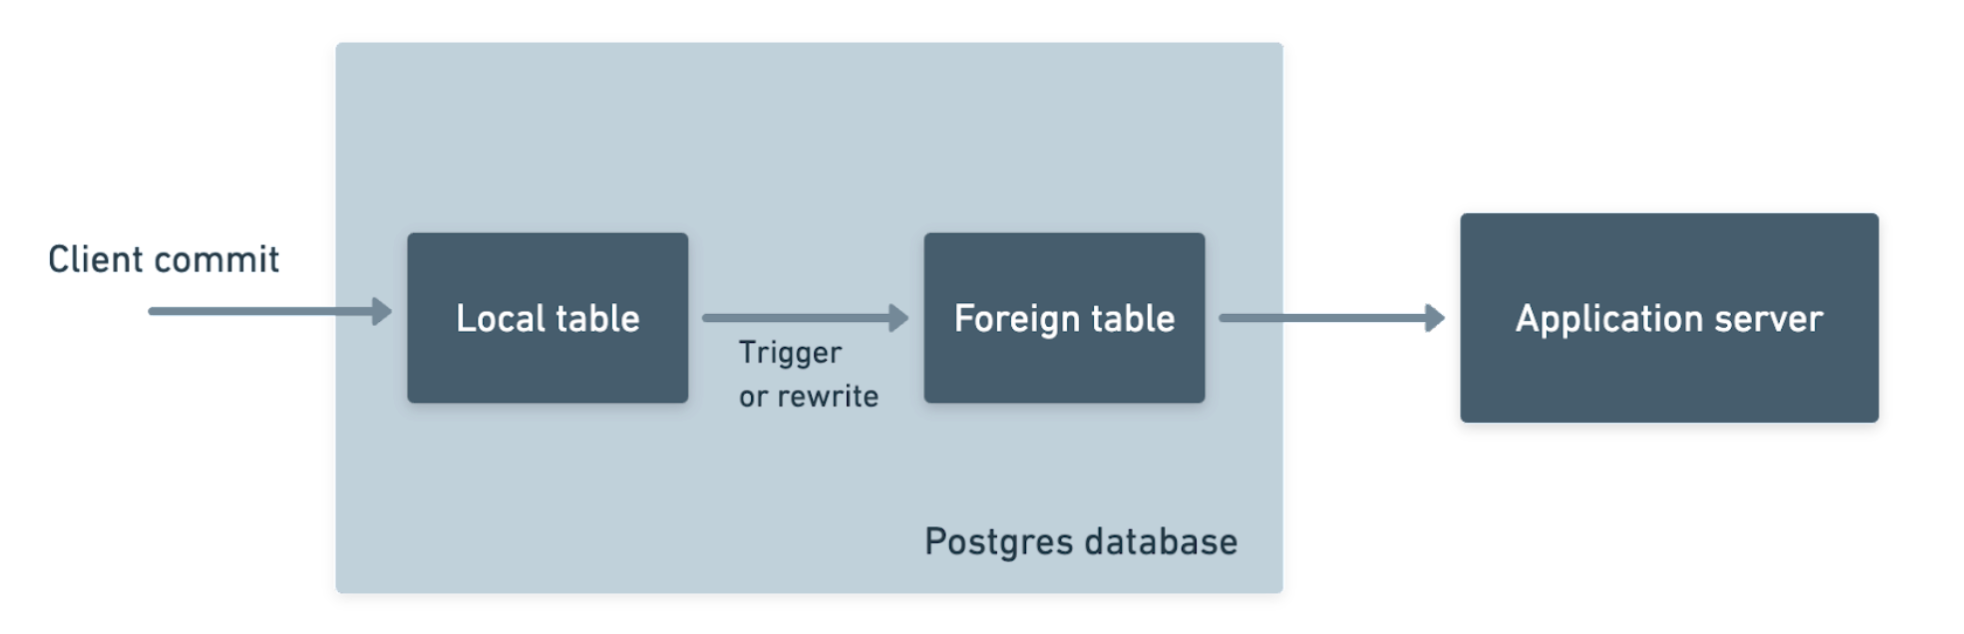 Foreign data wrappers architecture